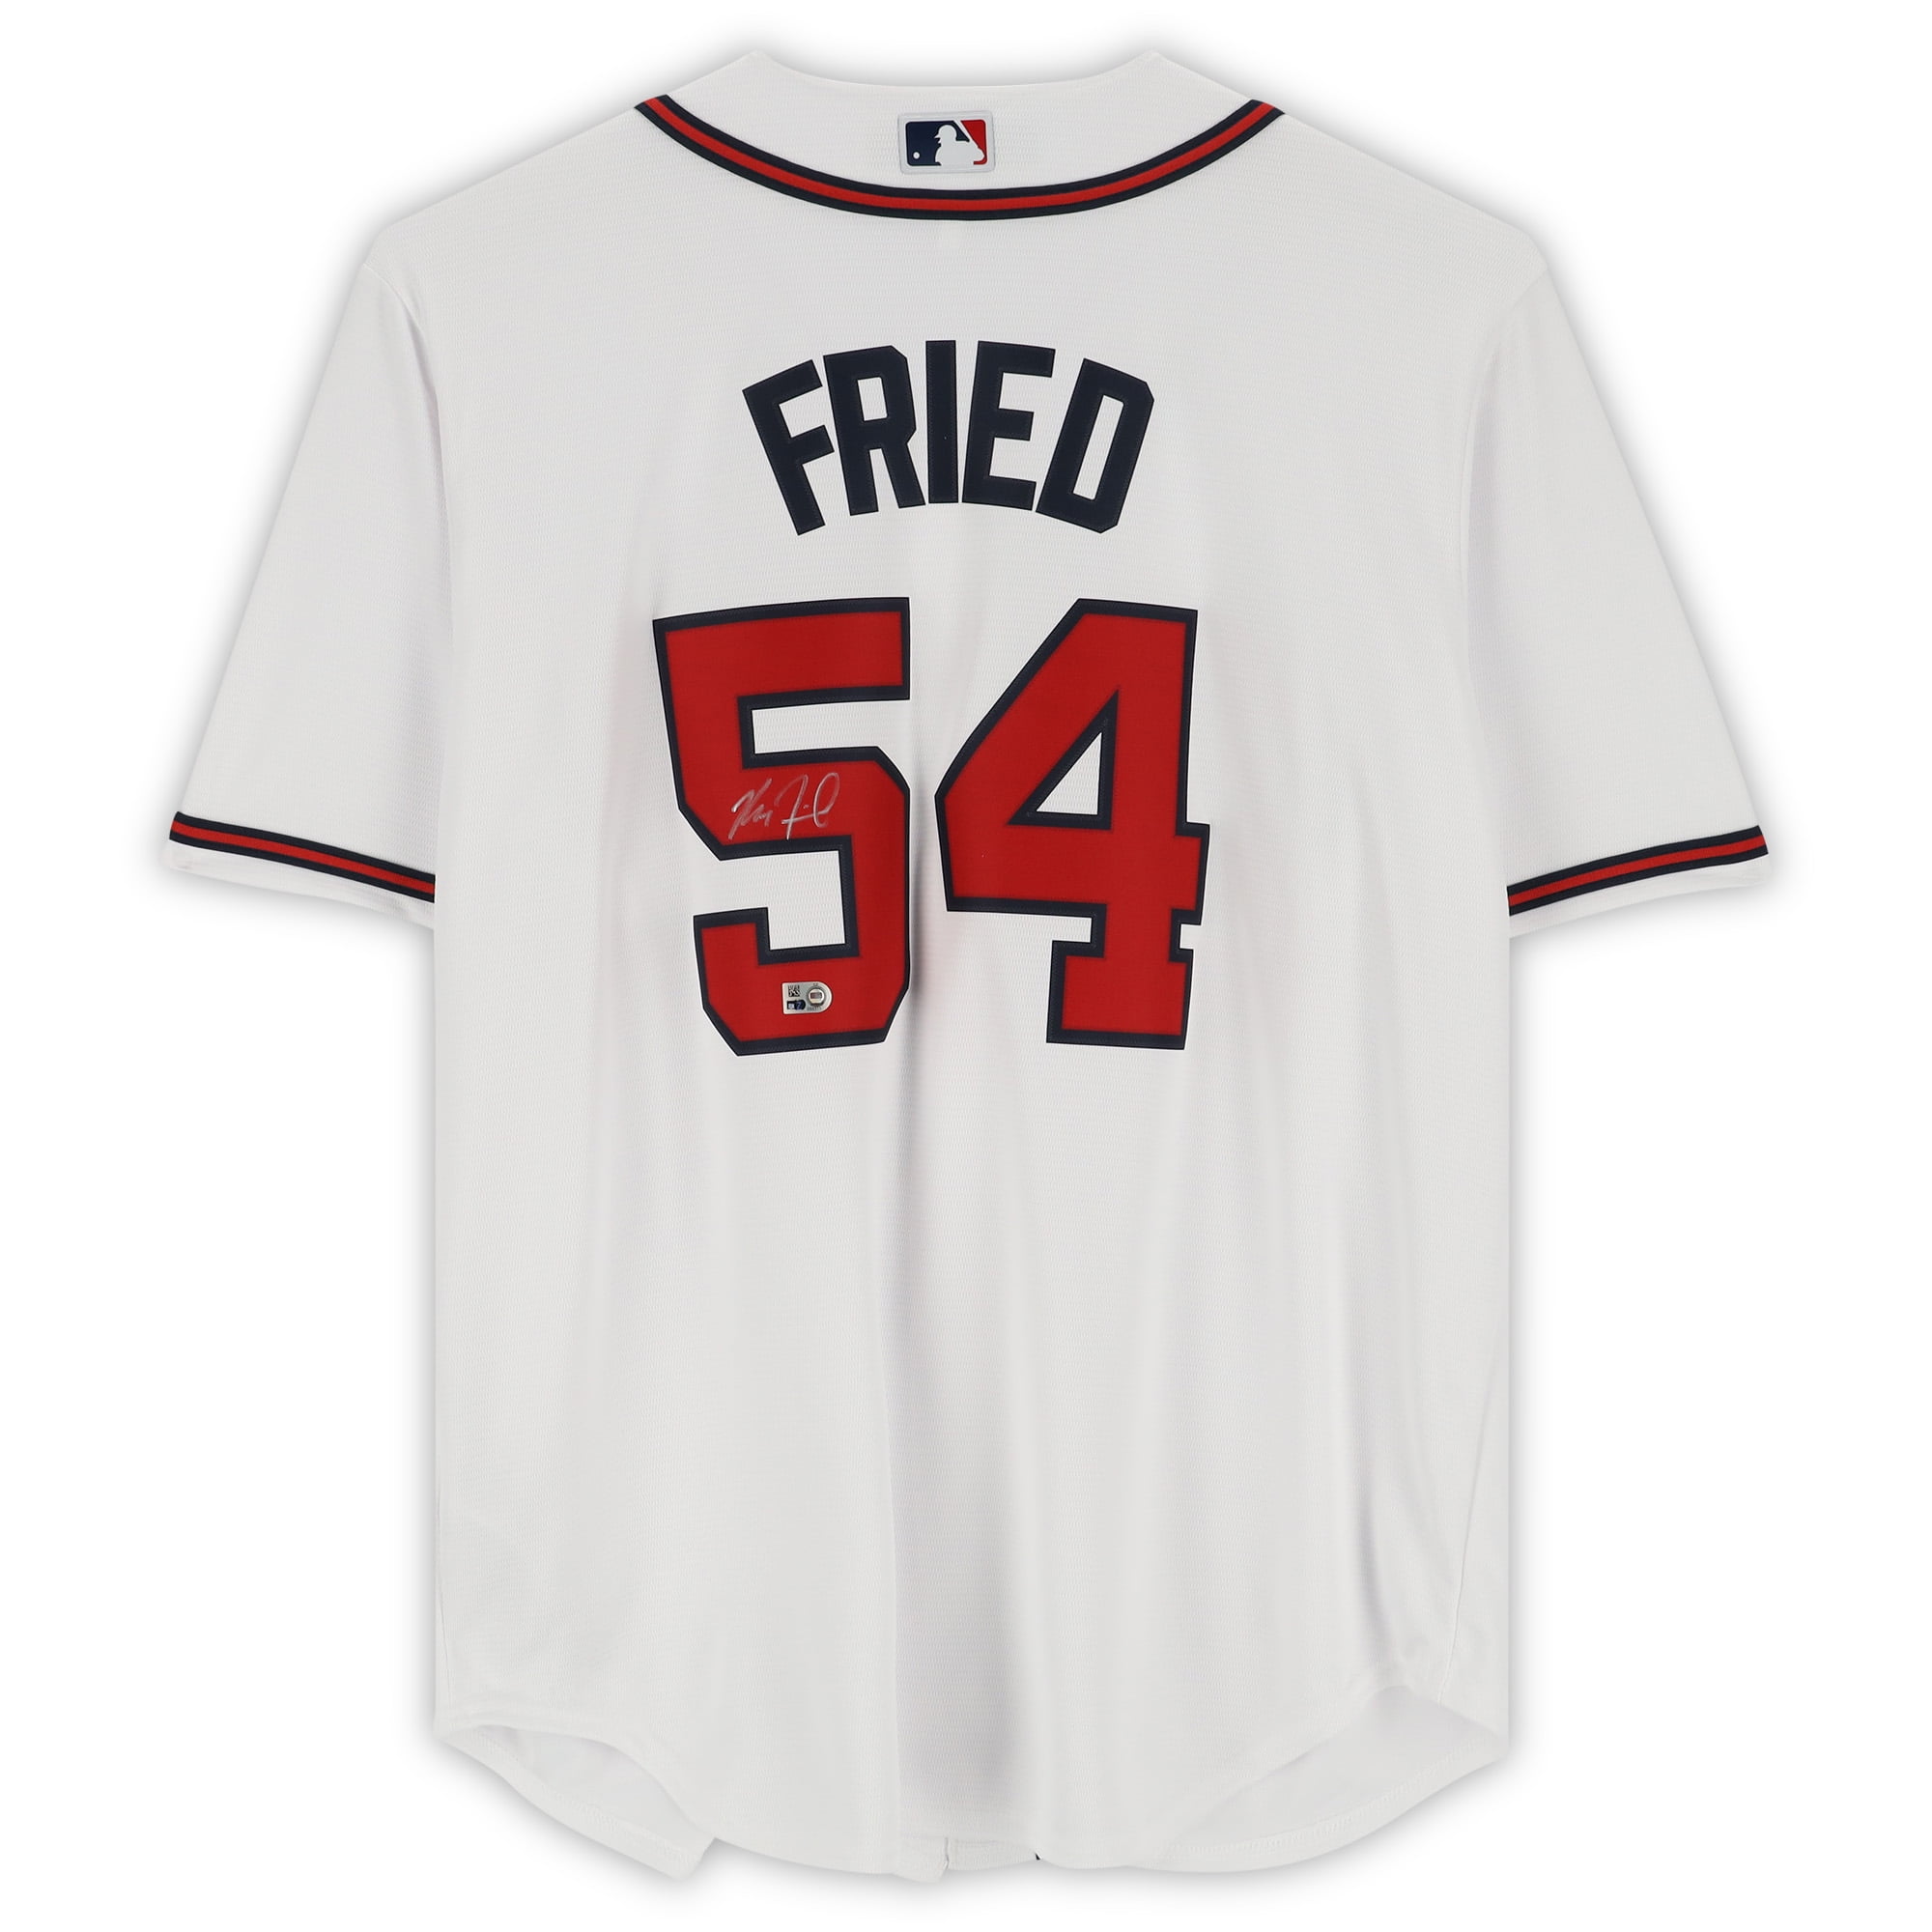 Max Fried Atlanta Braves Autographed Fanatics Authentic Red Nike Replica  Jersey